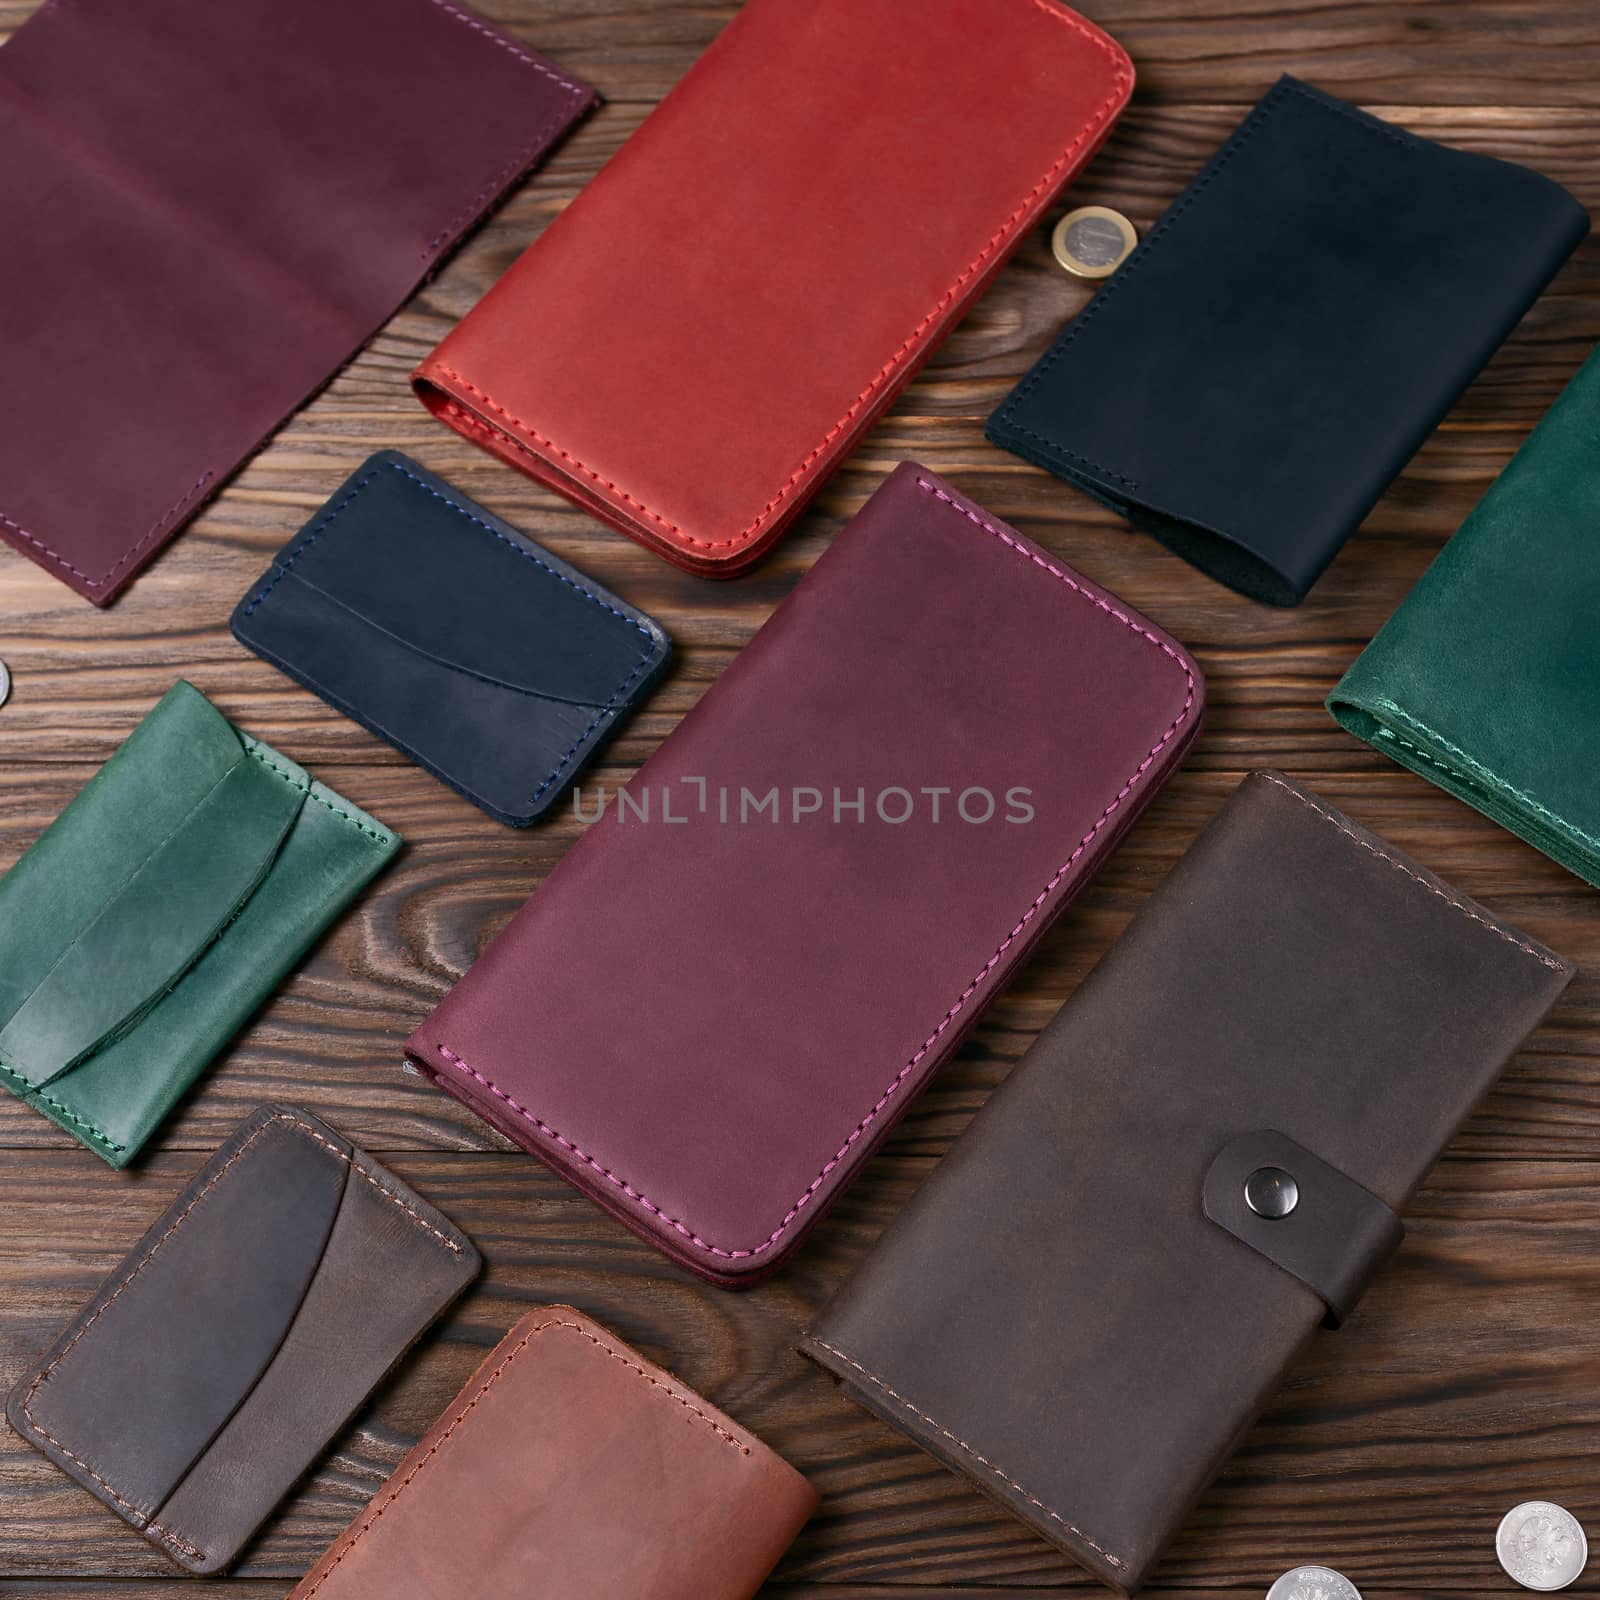 Purple color handmade leather porte-monnaie surrounded by other leather accessories on wooden textured background.  Side view. Stock photo of luxury accessories. by alexsdriver